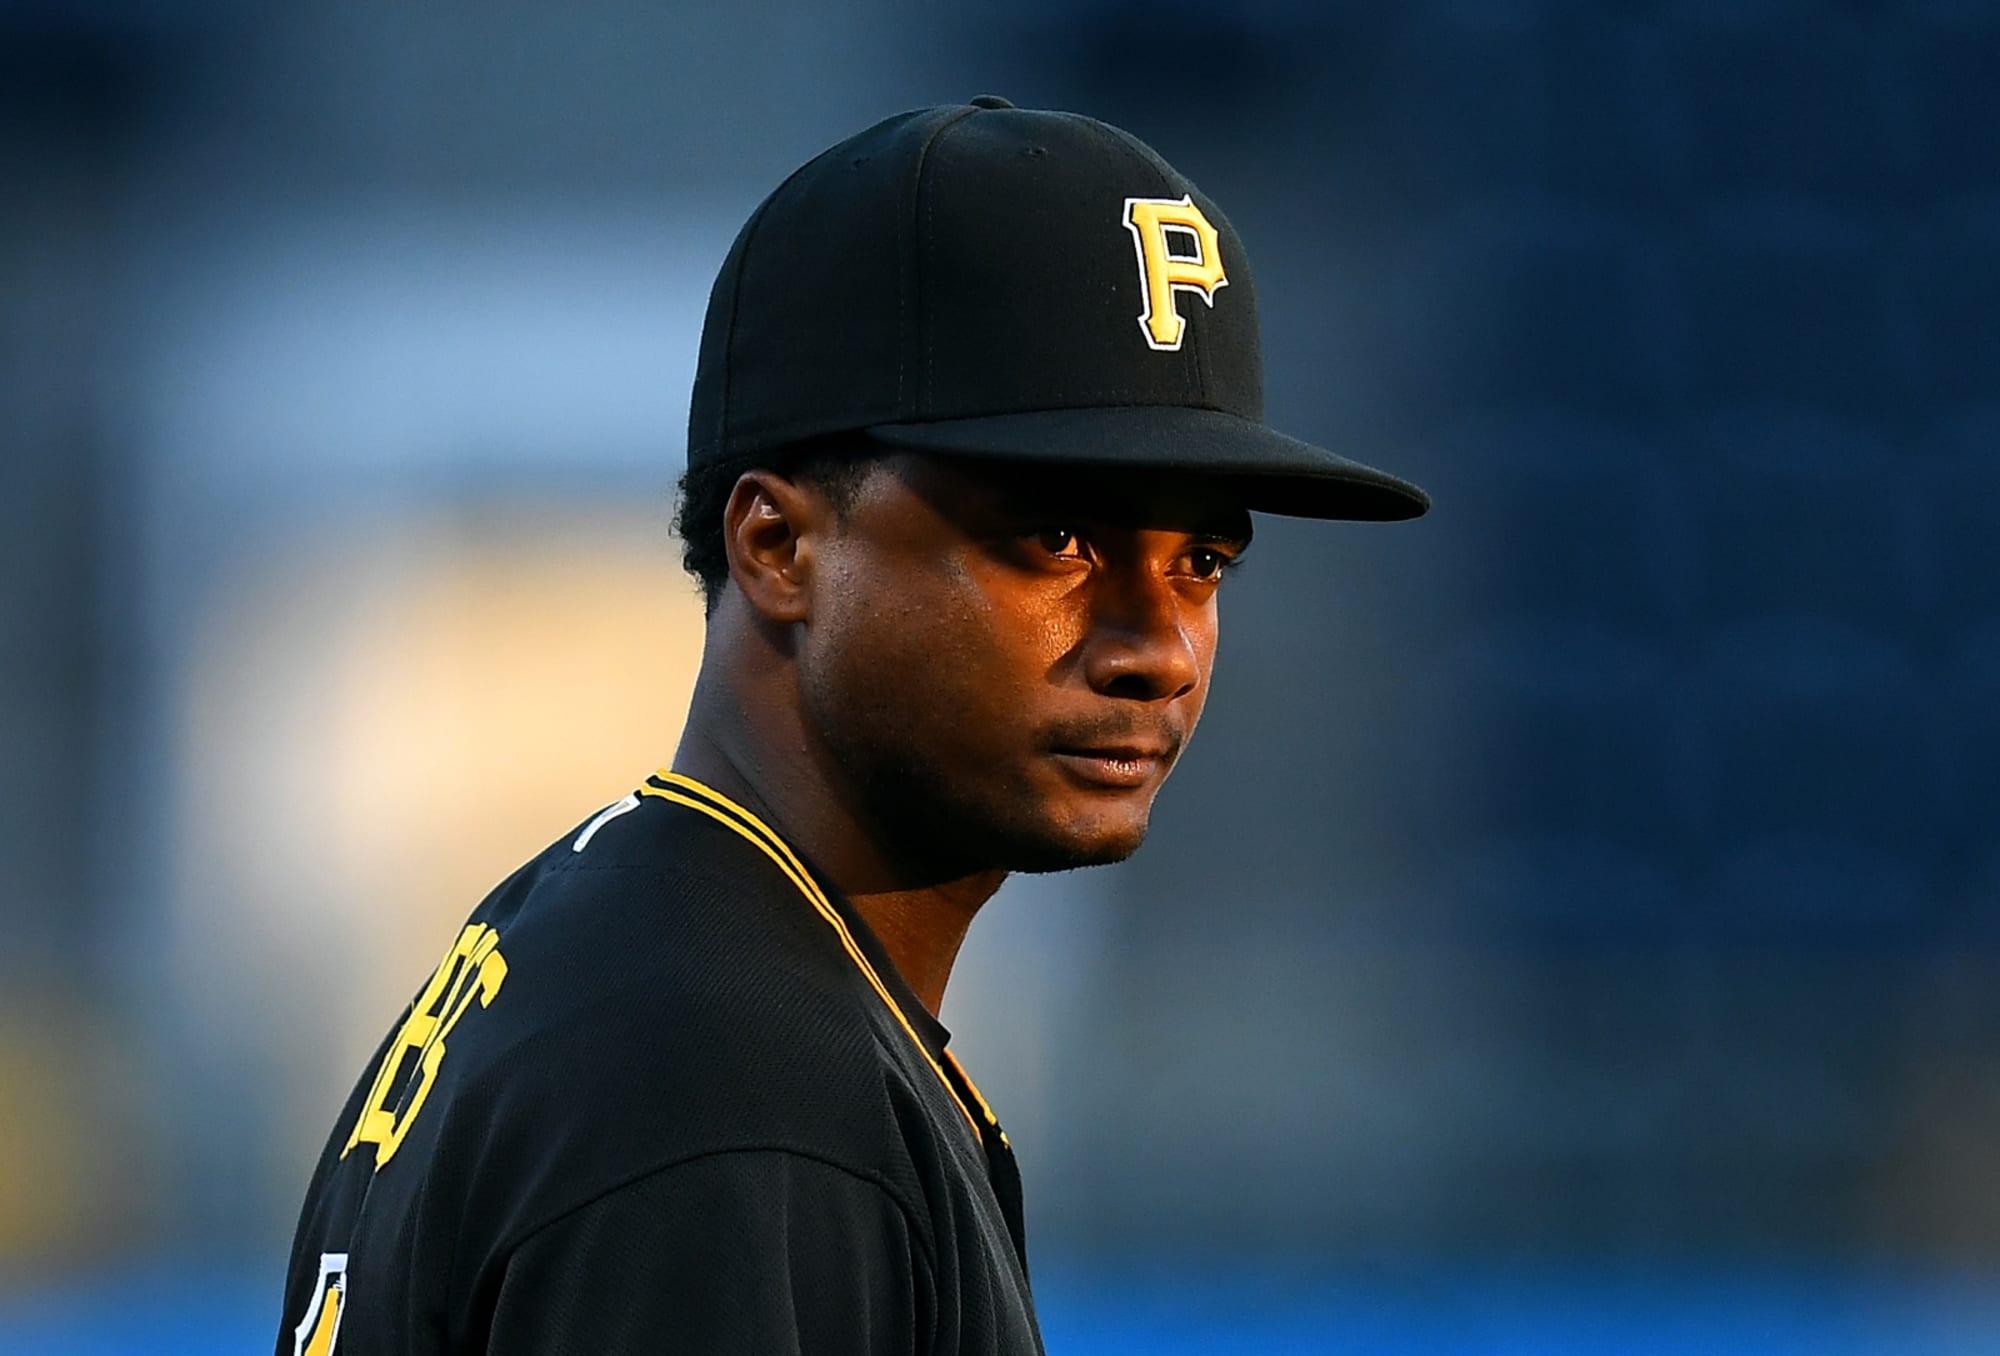 pittsburgh-pirates-announce-four-additions-to-opening-day-roster